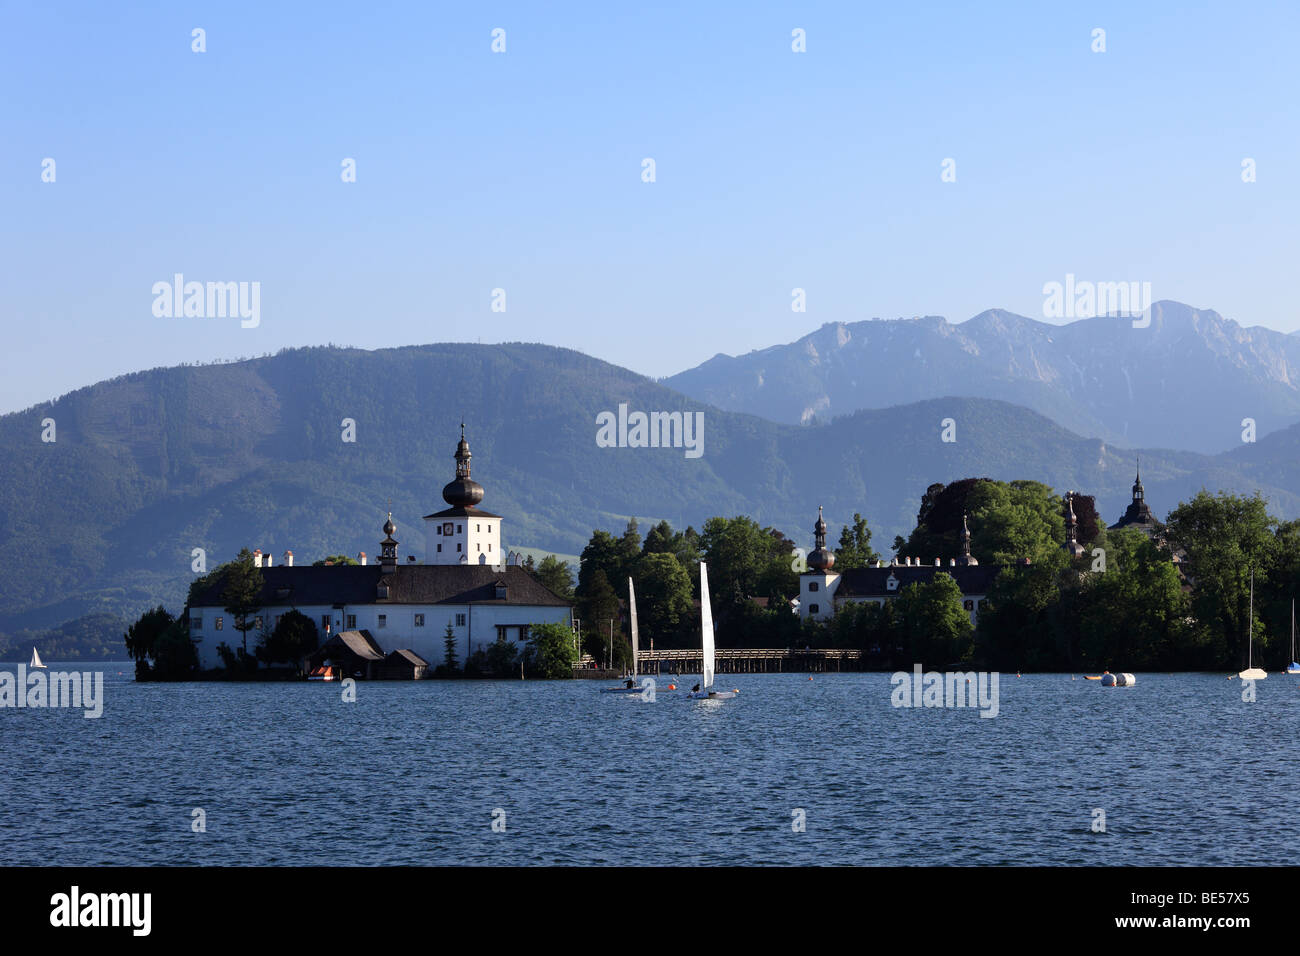 Seeschloss castle and country house Ort in Gmunden, Traunsee lake, Salzkammergut, Upper Austria, Austria, Europe Stock Photo